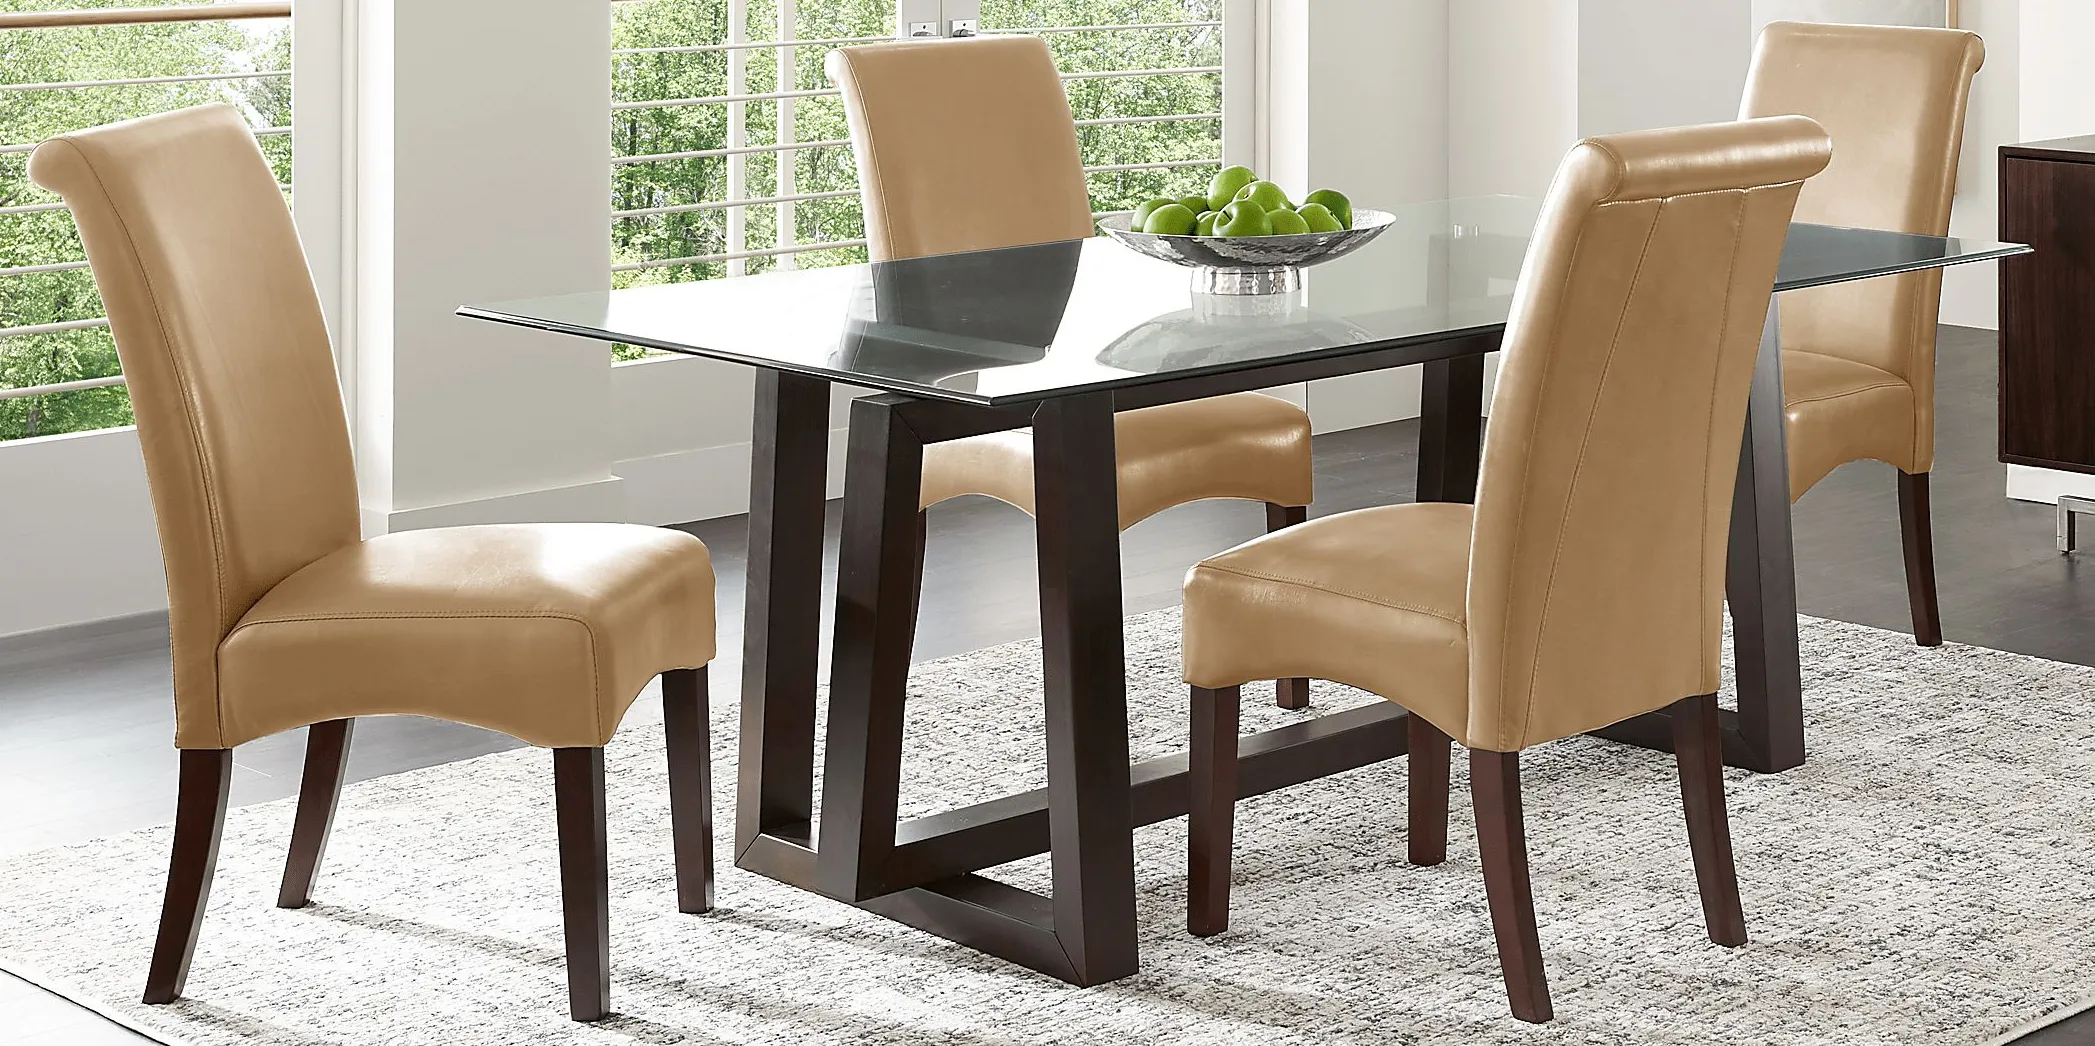 Fanmoore Espresso 5 Pc Dining Set with Tan Chairs